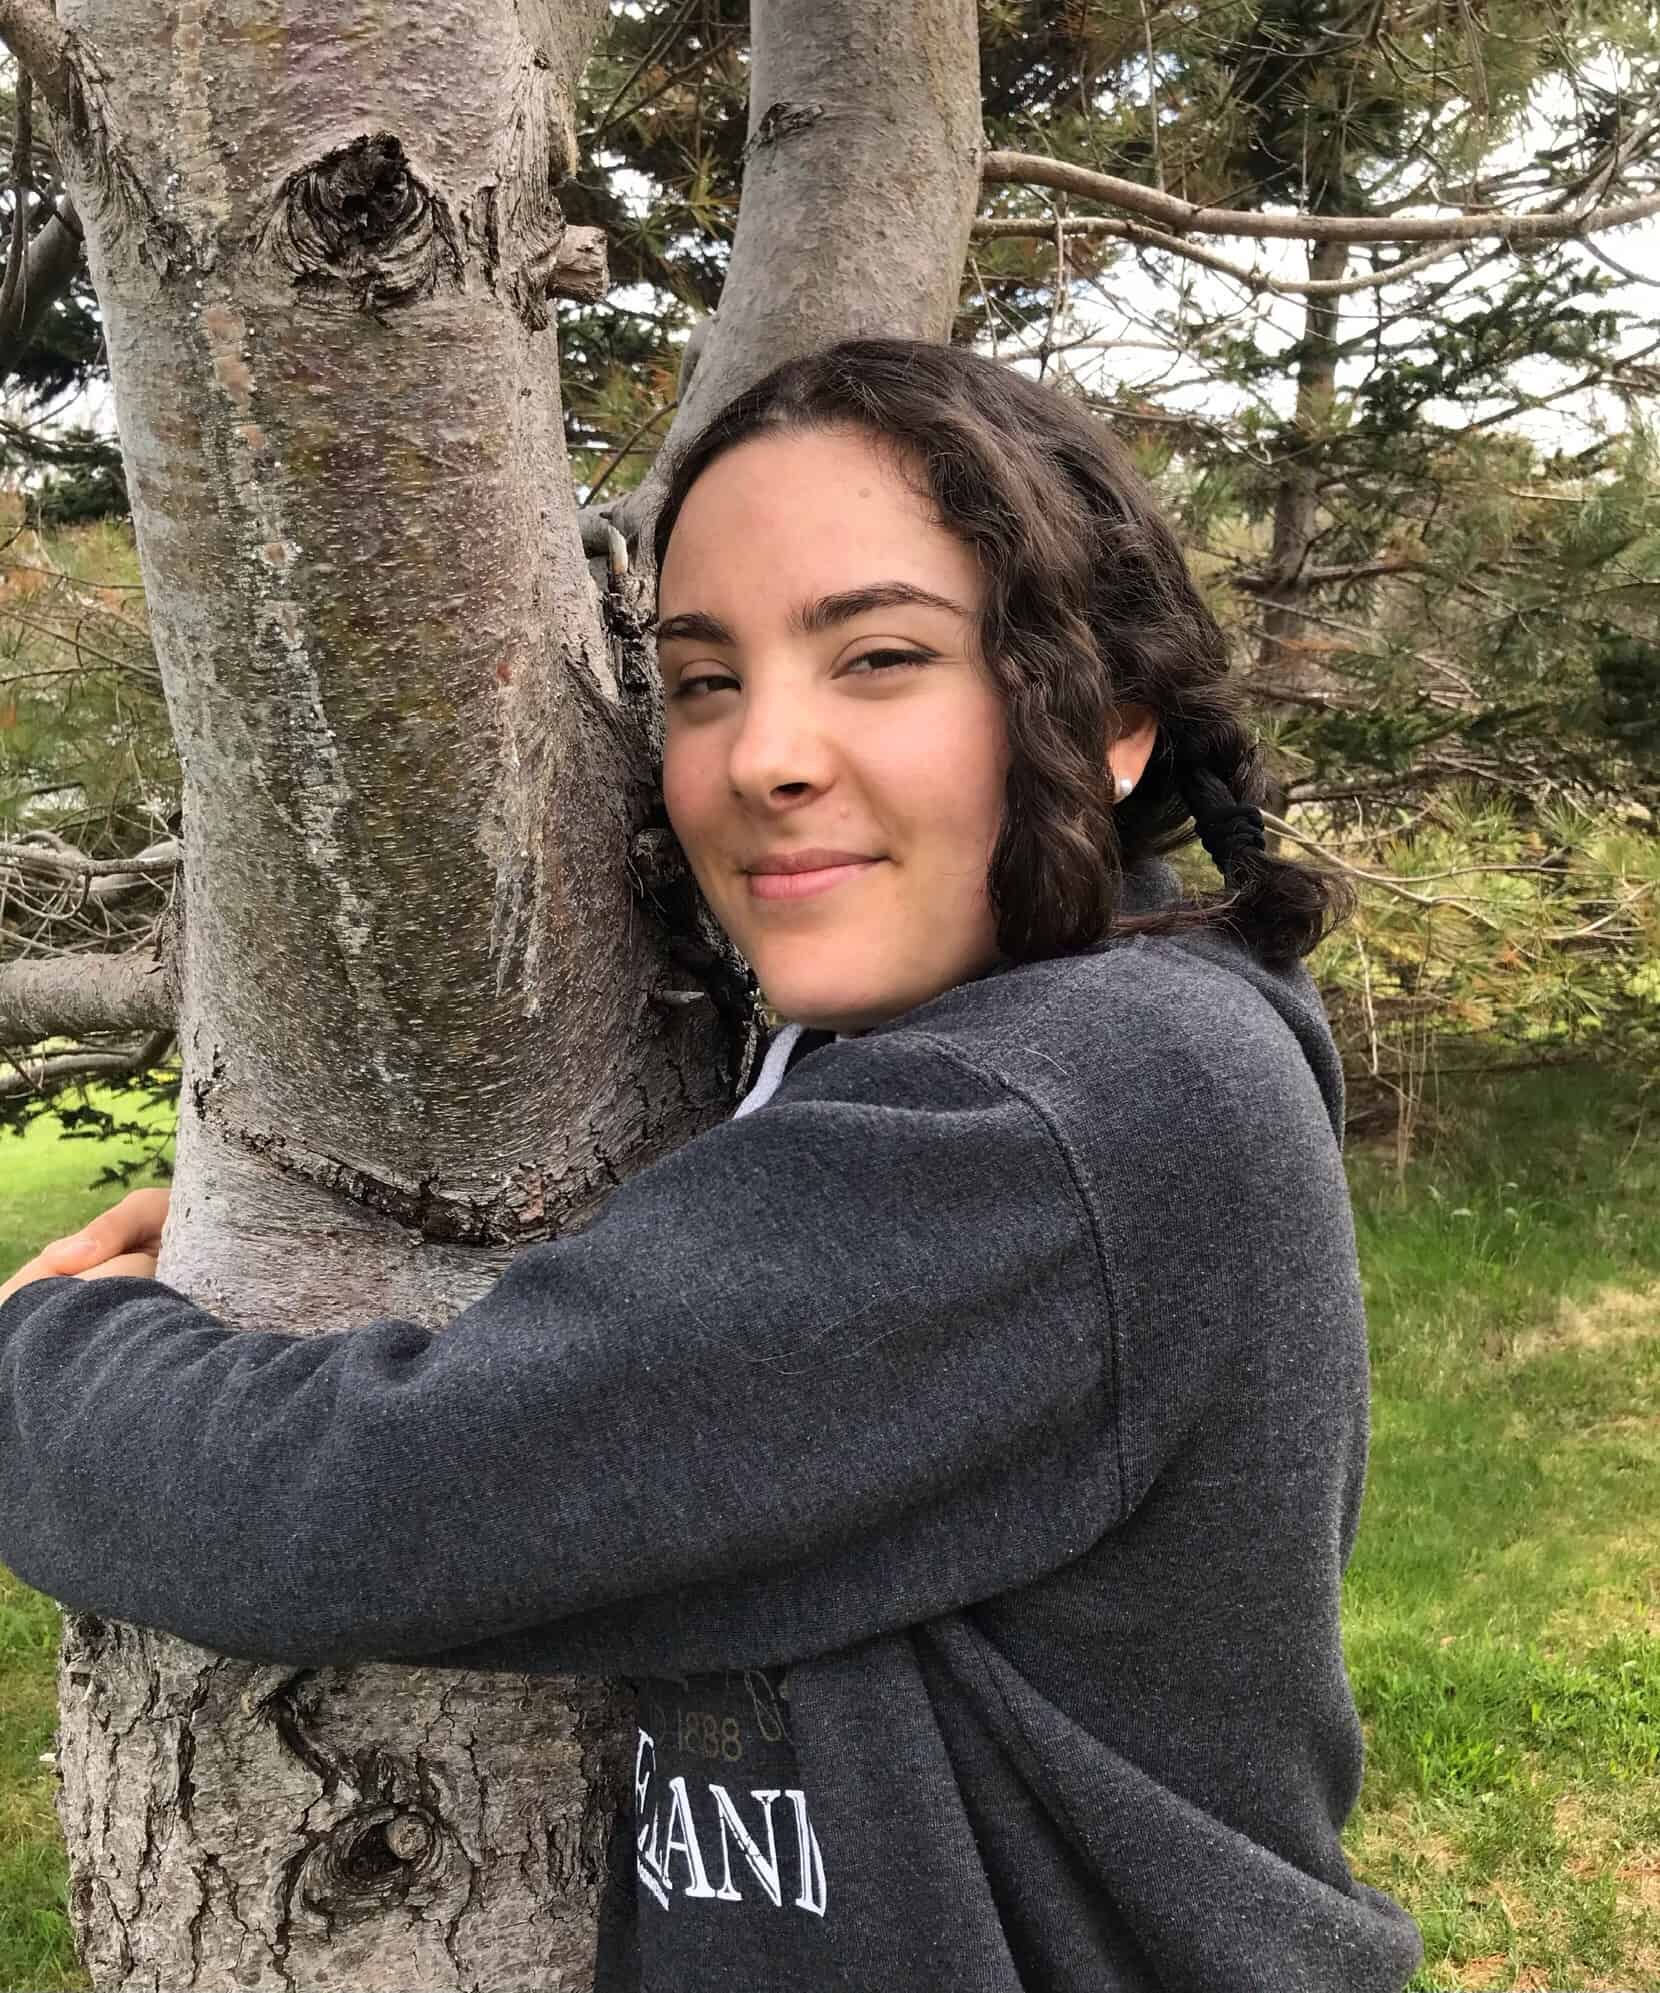 Isabelle, a young woman with dark shoulder length hair and brown eyes hugs a tree, smiling